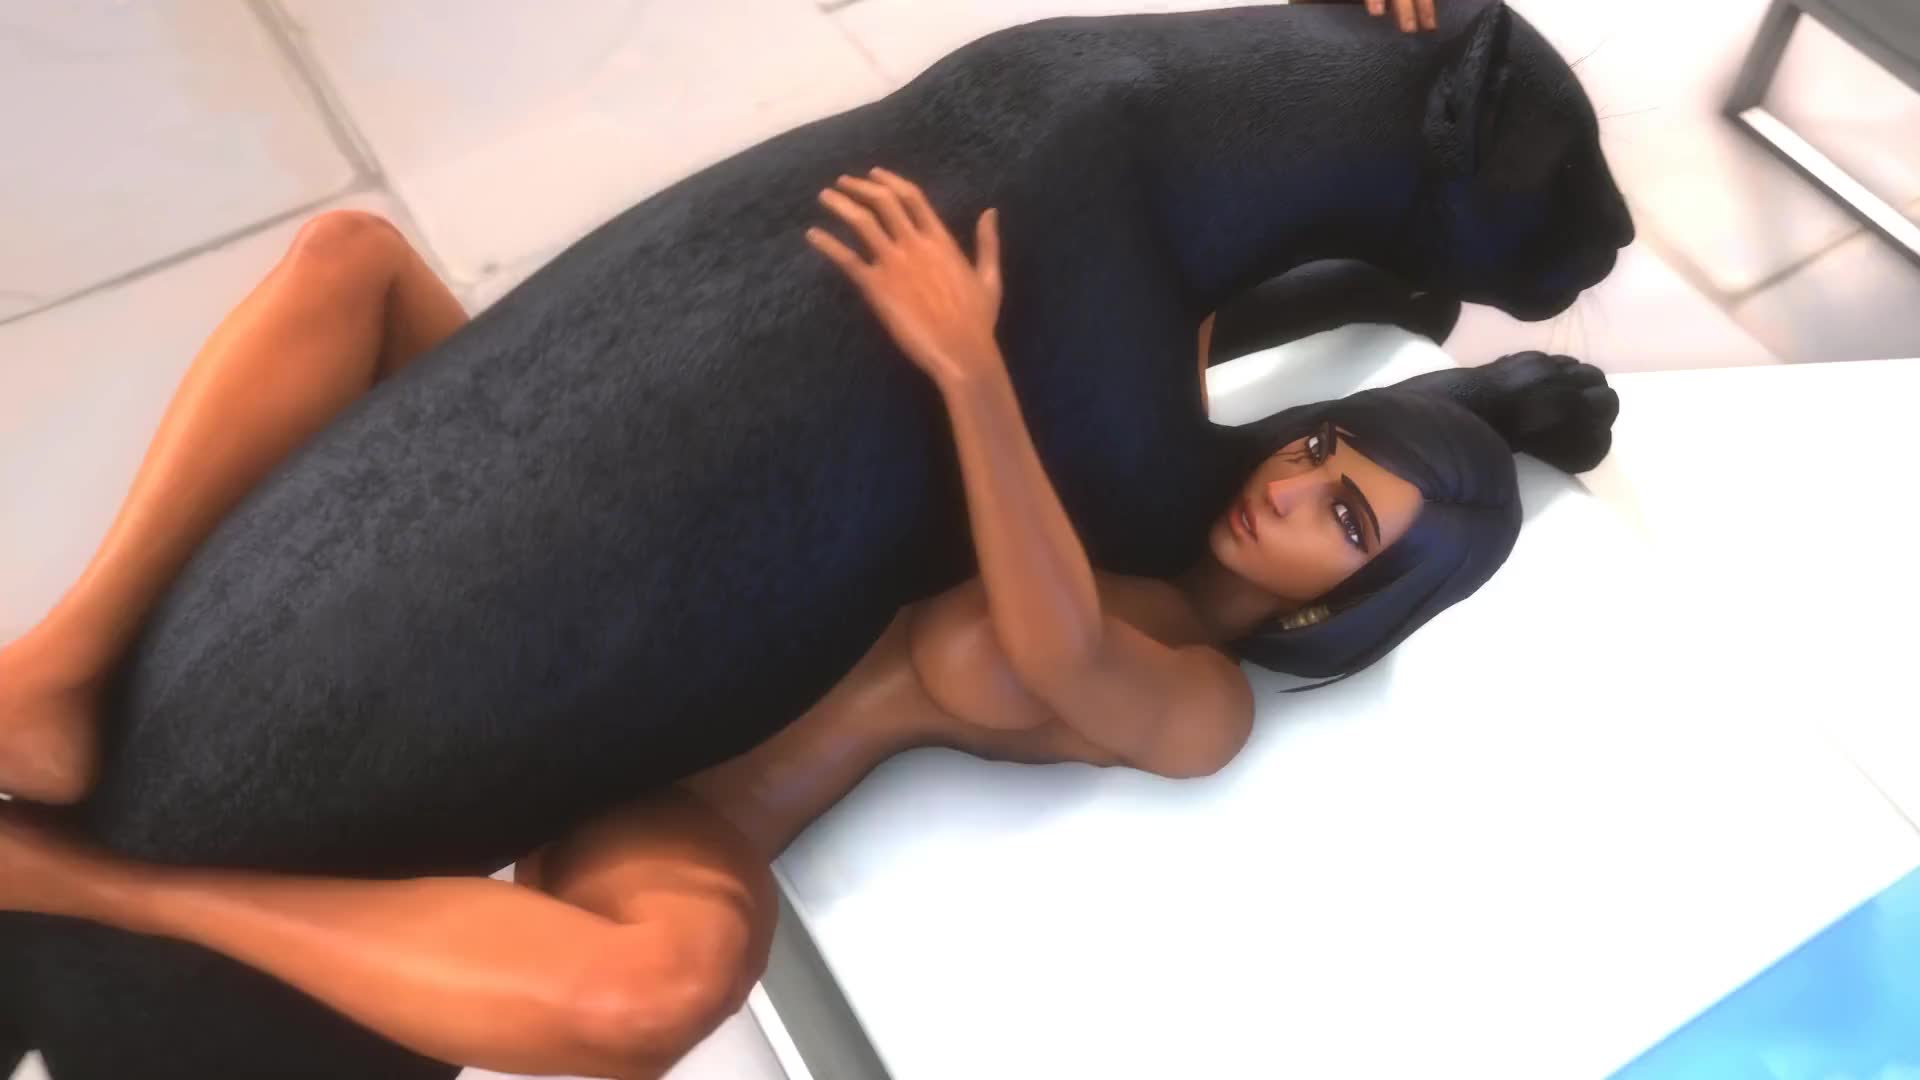 Pharah Gets Dog Dick In Missionary Position – Overwatch NSFW animation thumbnail